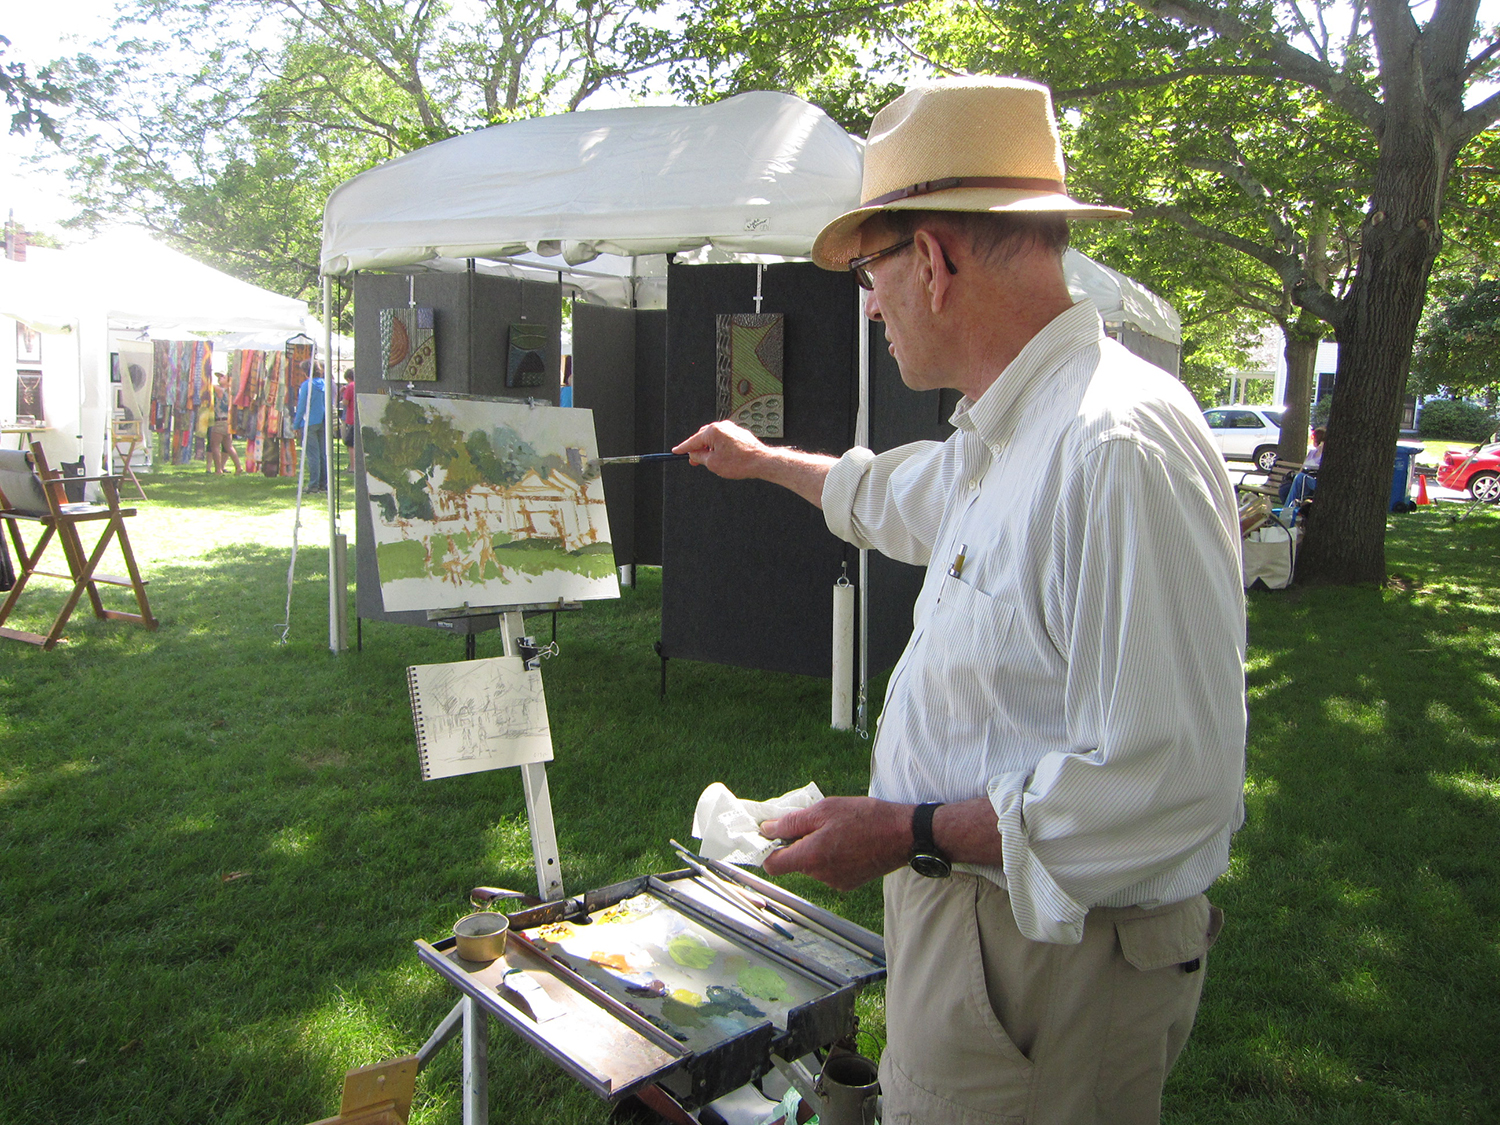 Painting at Festival